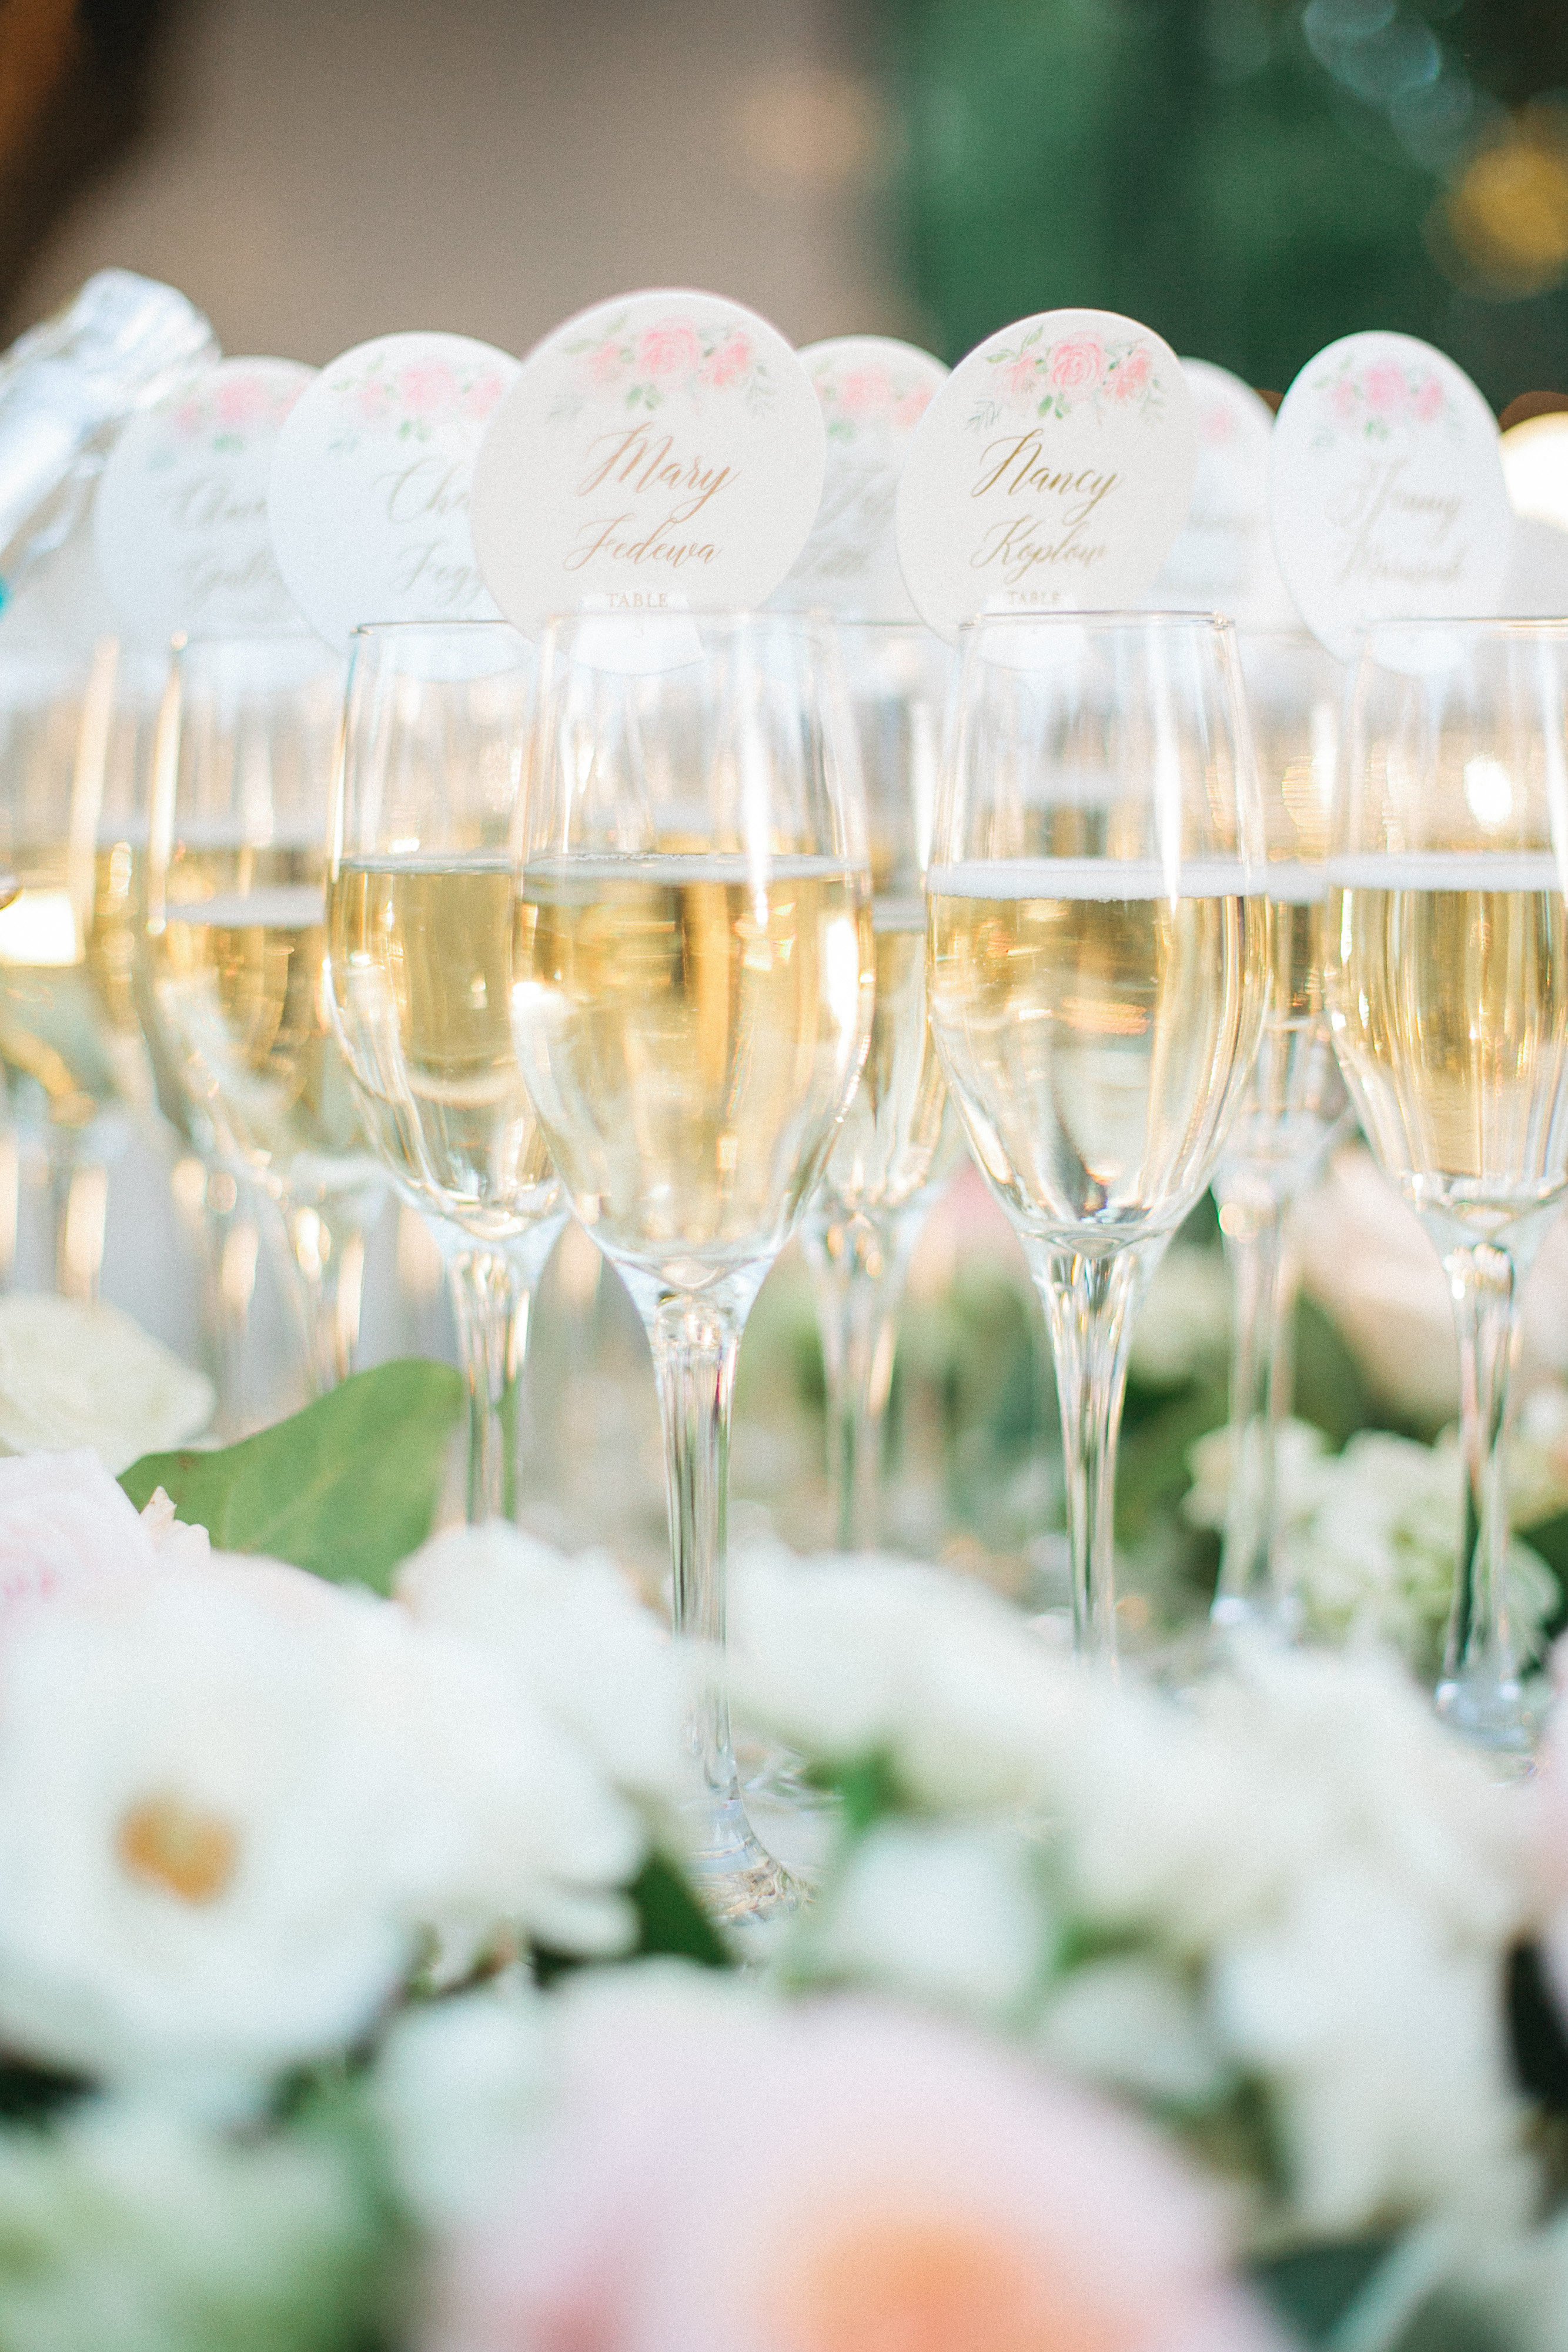 Champagne glasses and flowers